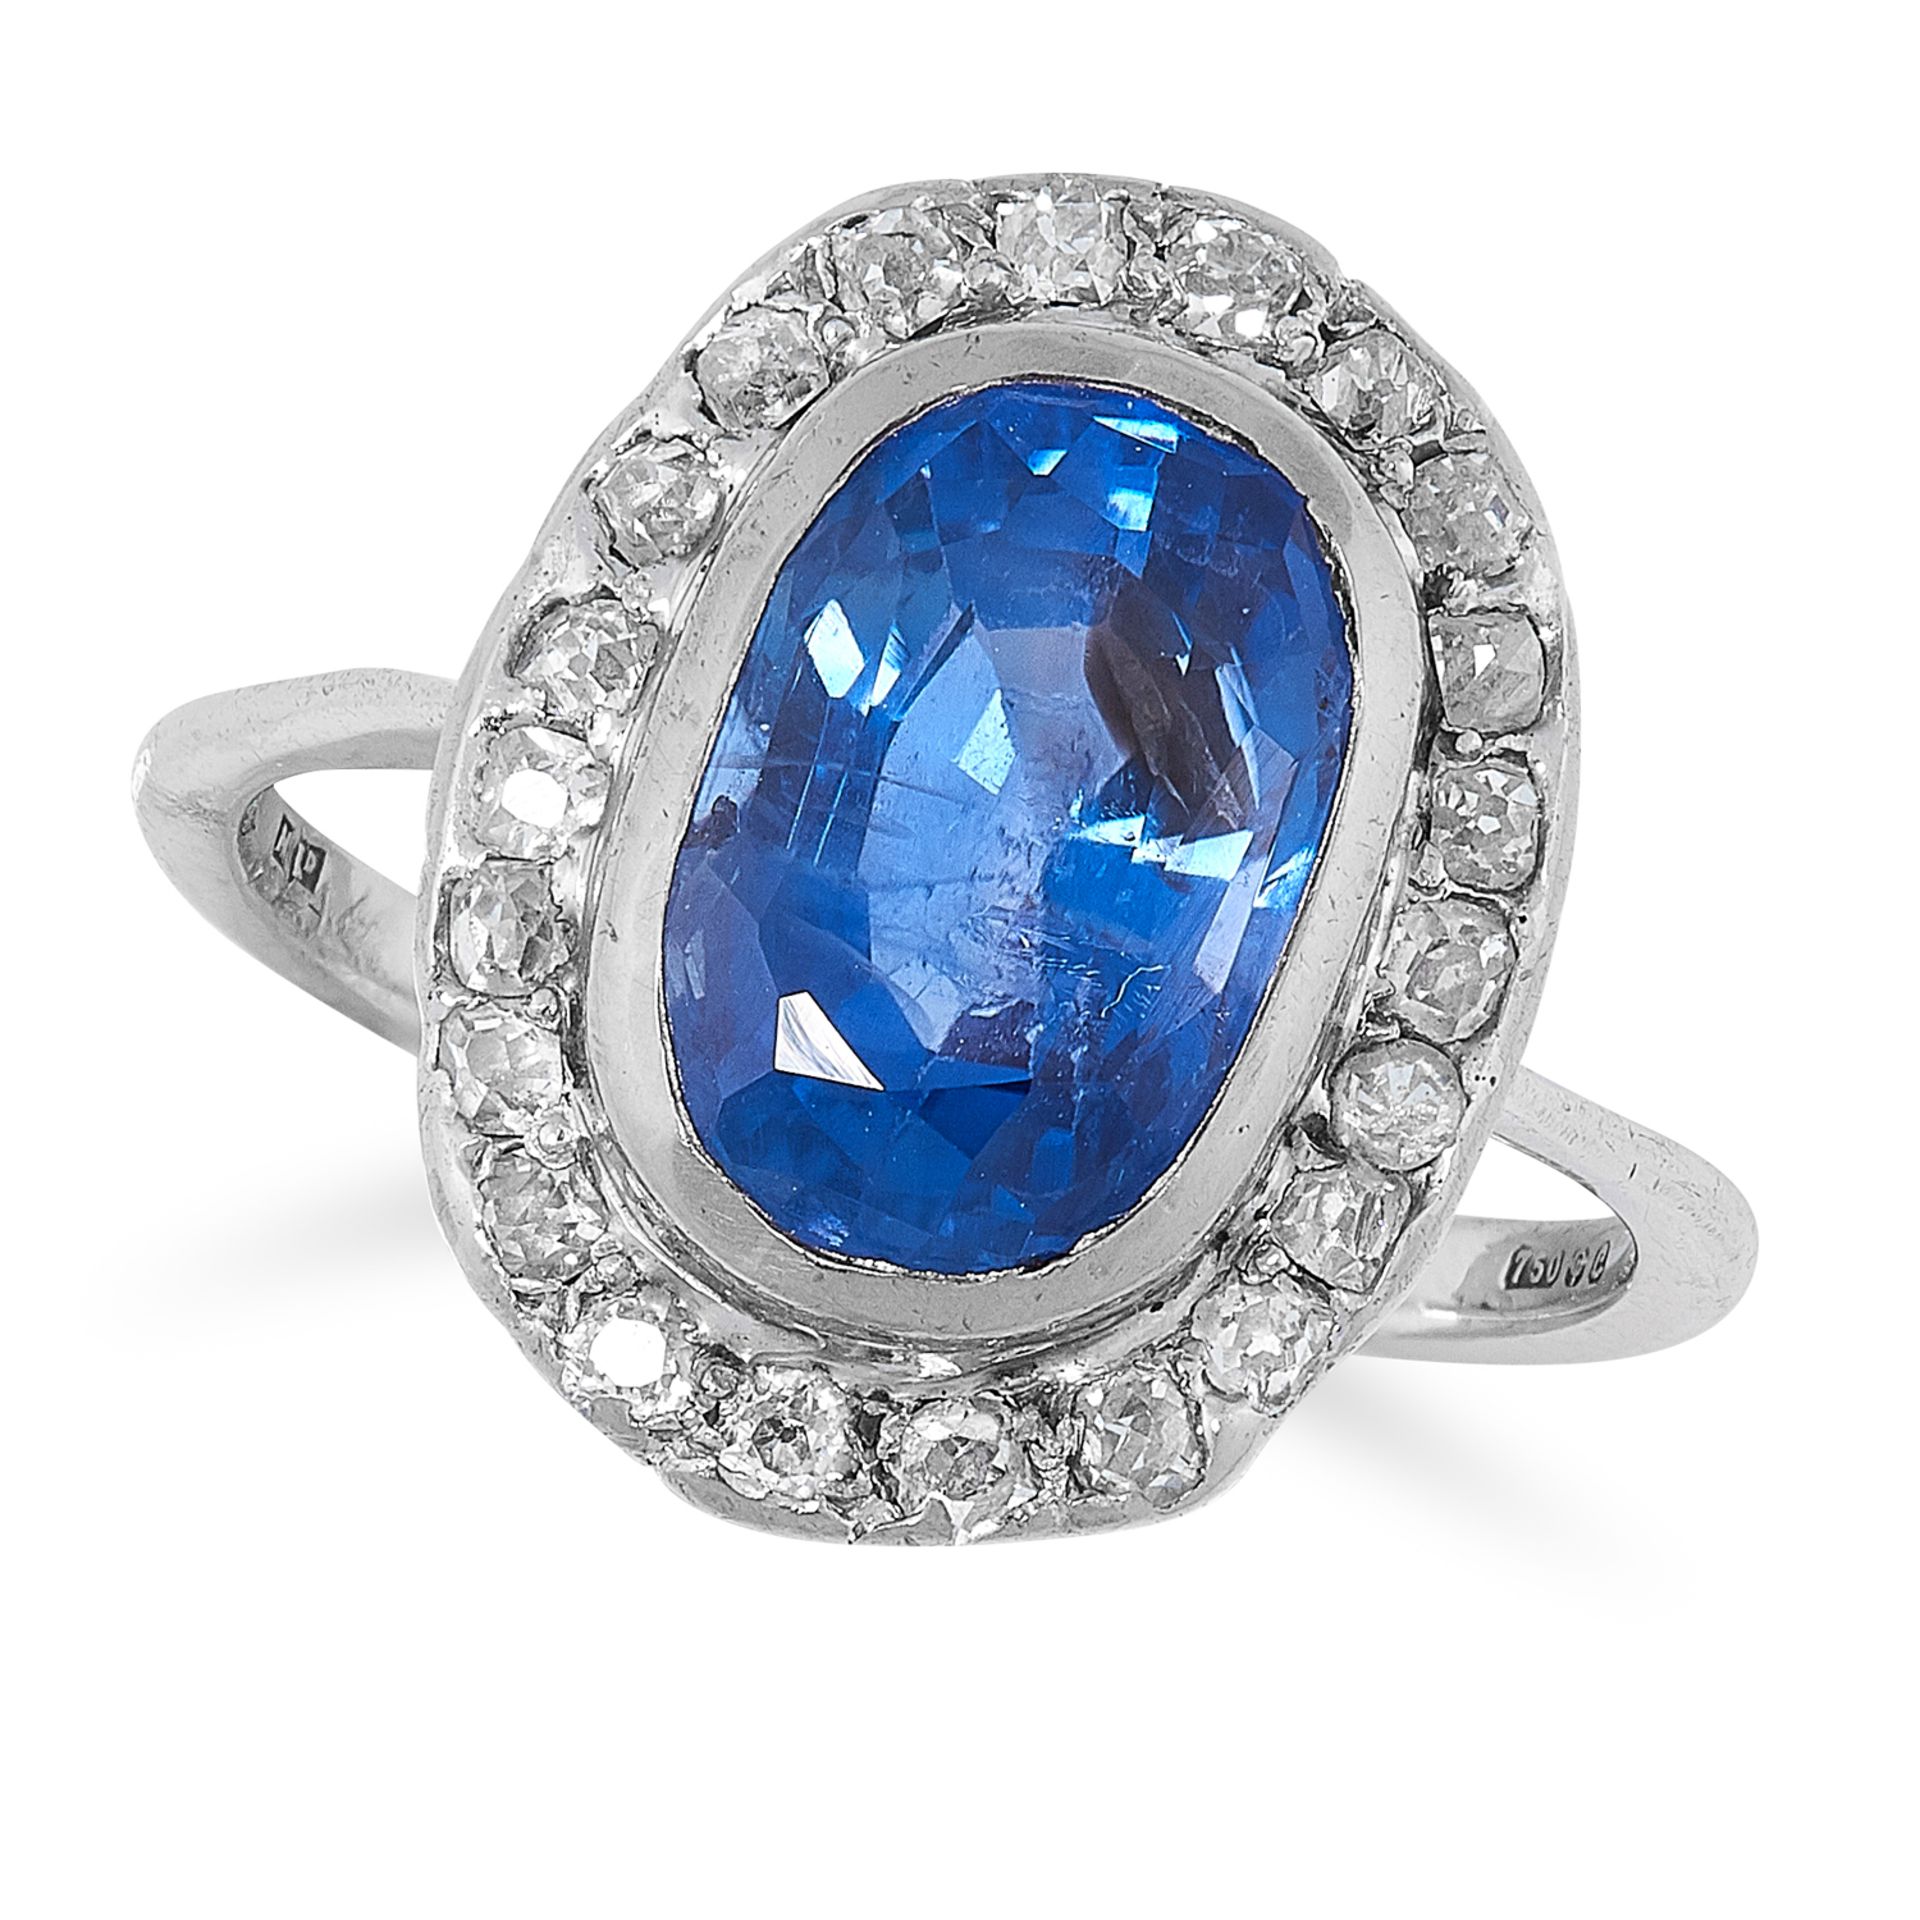 A COLOUR CHANGE SAPPHIRE AND DIAMOND CLUSTER RING in 18ct white gold, set with a central cushion cut